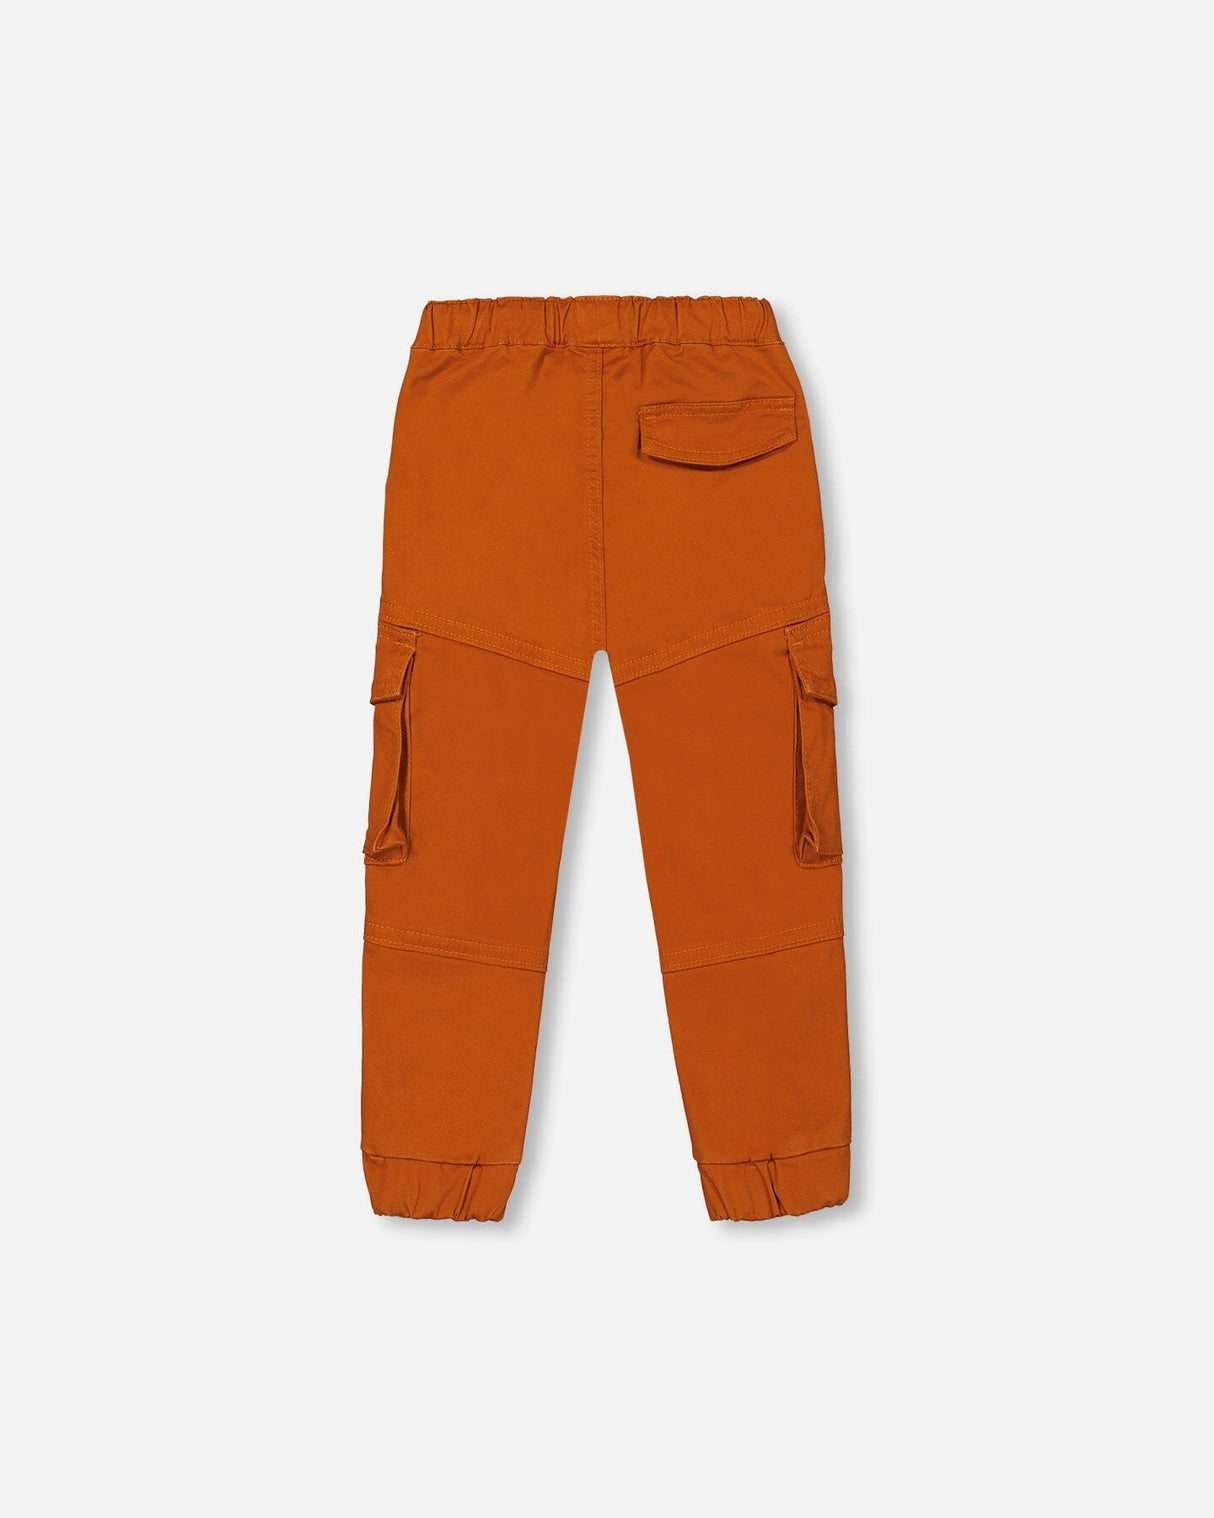 Stretch Twill Jogger Pants With Cargo Pockets Brown-Orange-3